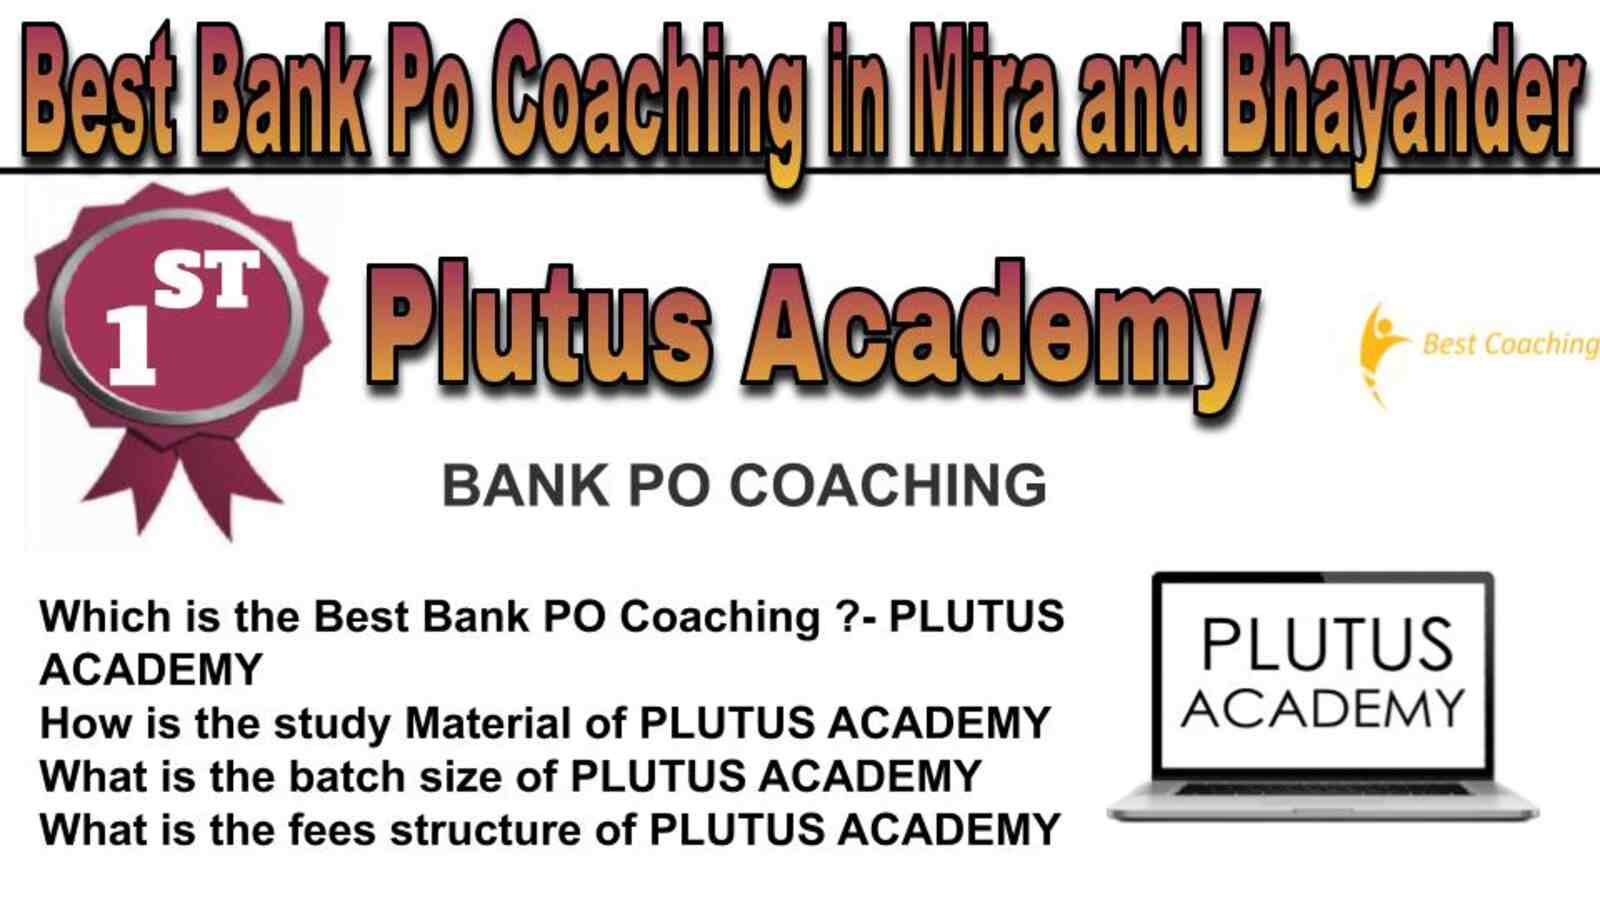 Rank 1 best bank po coaching in Mira and Bhayander